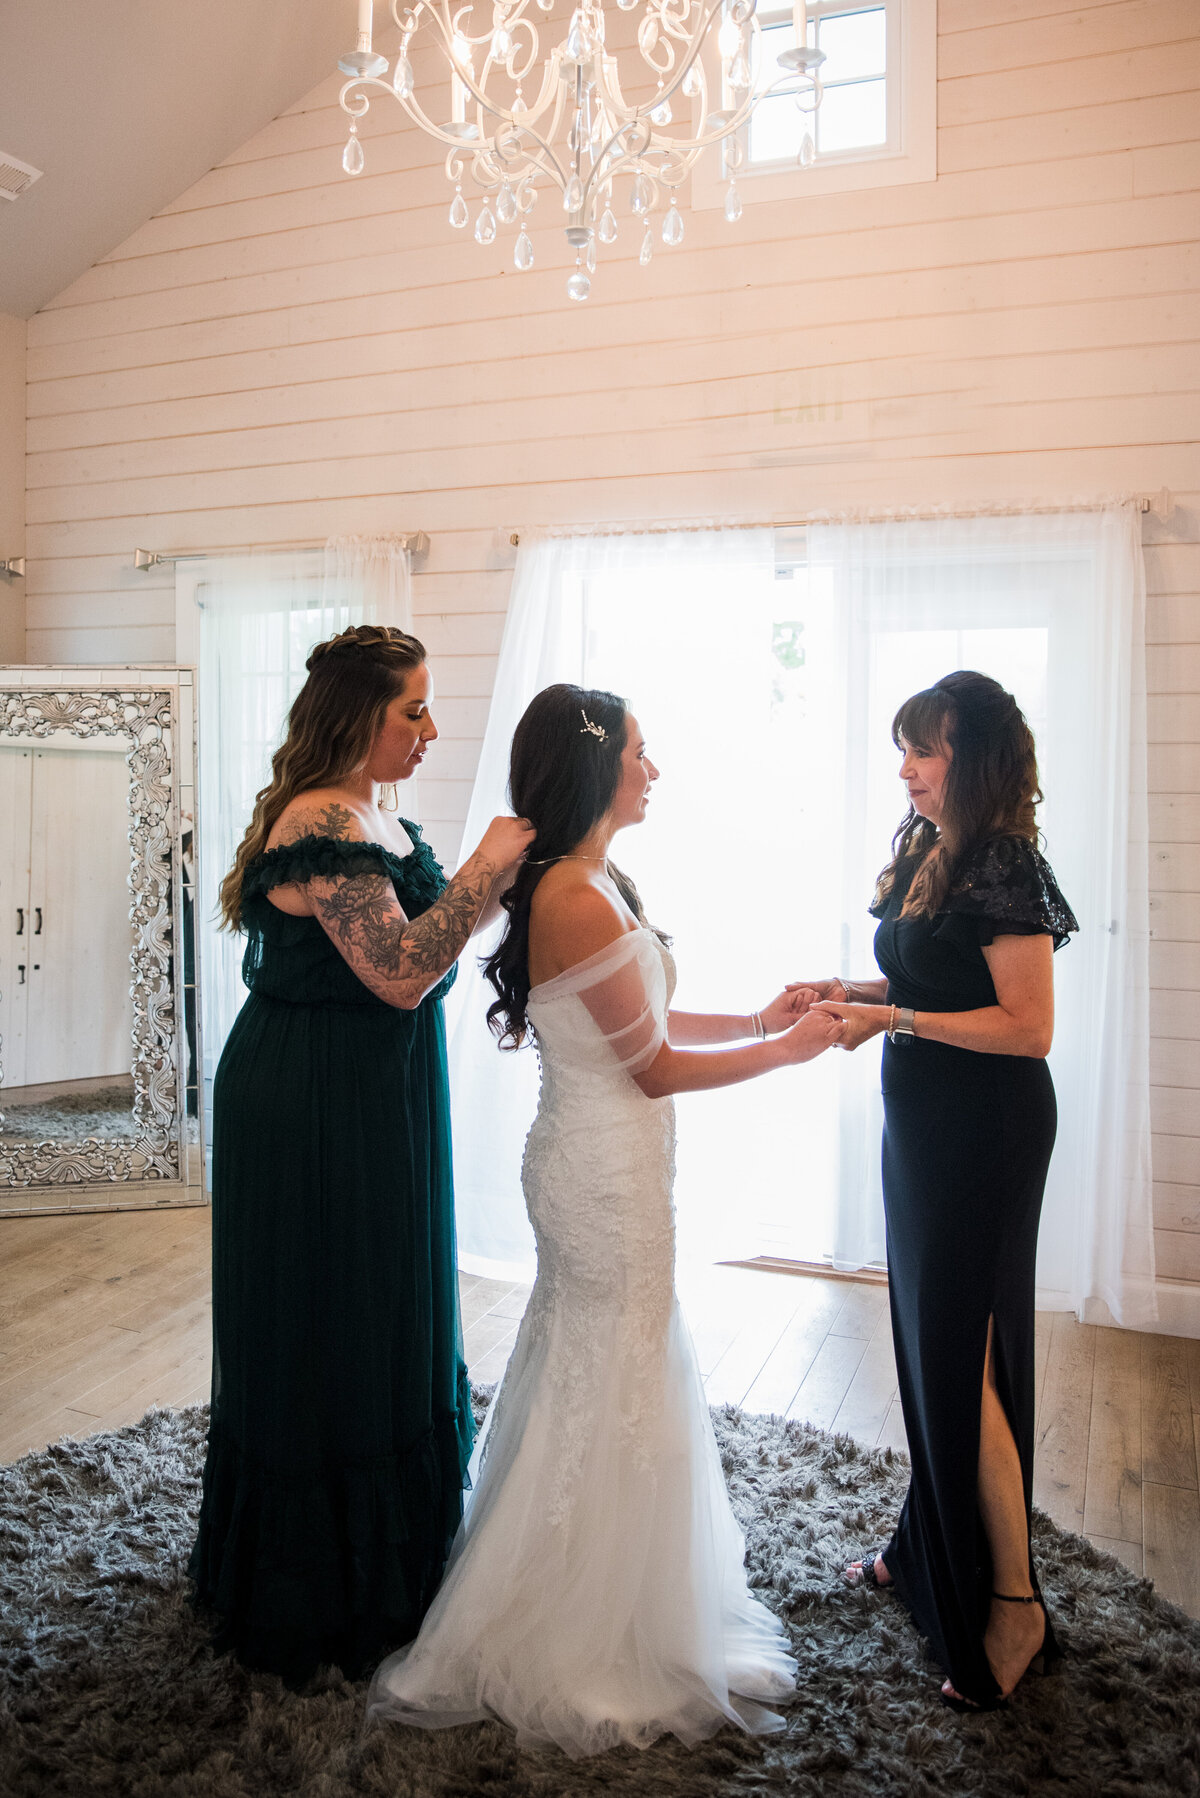 A bride stands with two bridesmaids. One holds her hands and the another puts on her necklace.